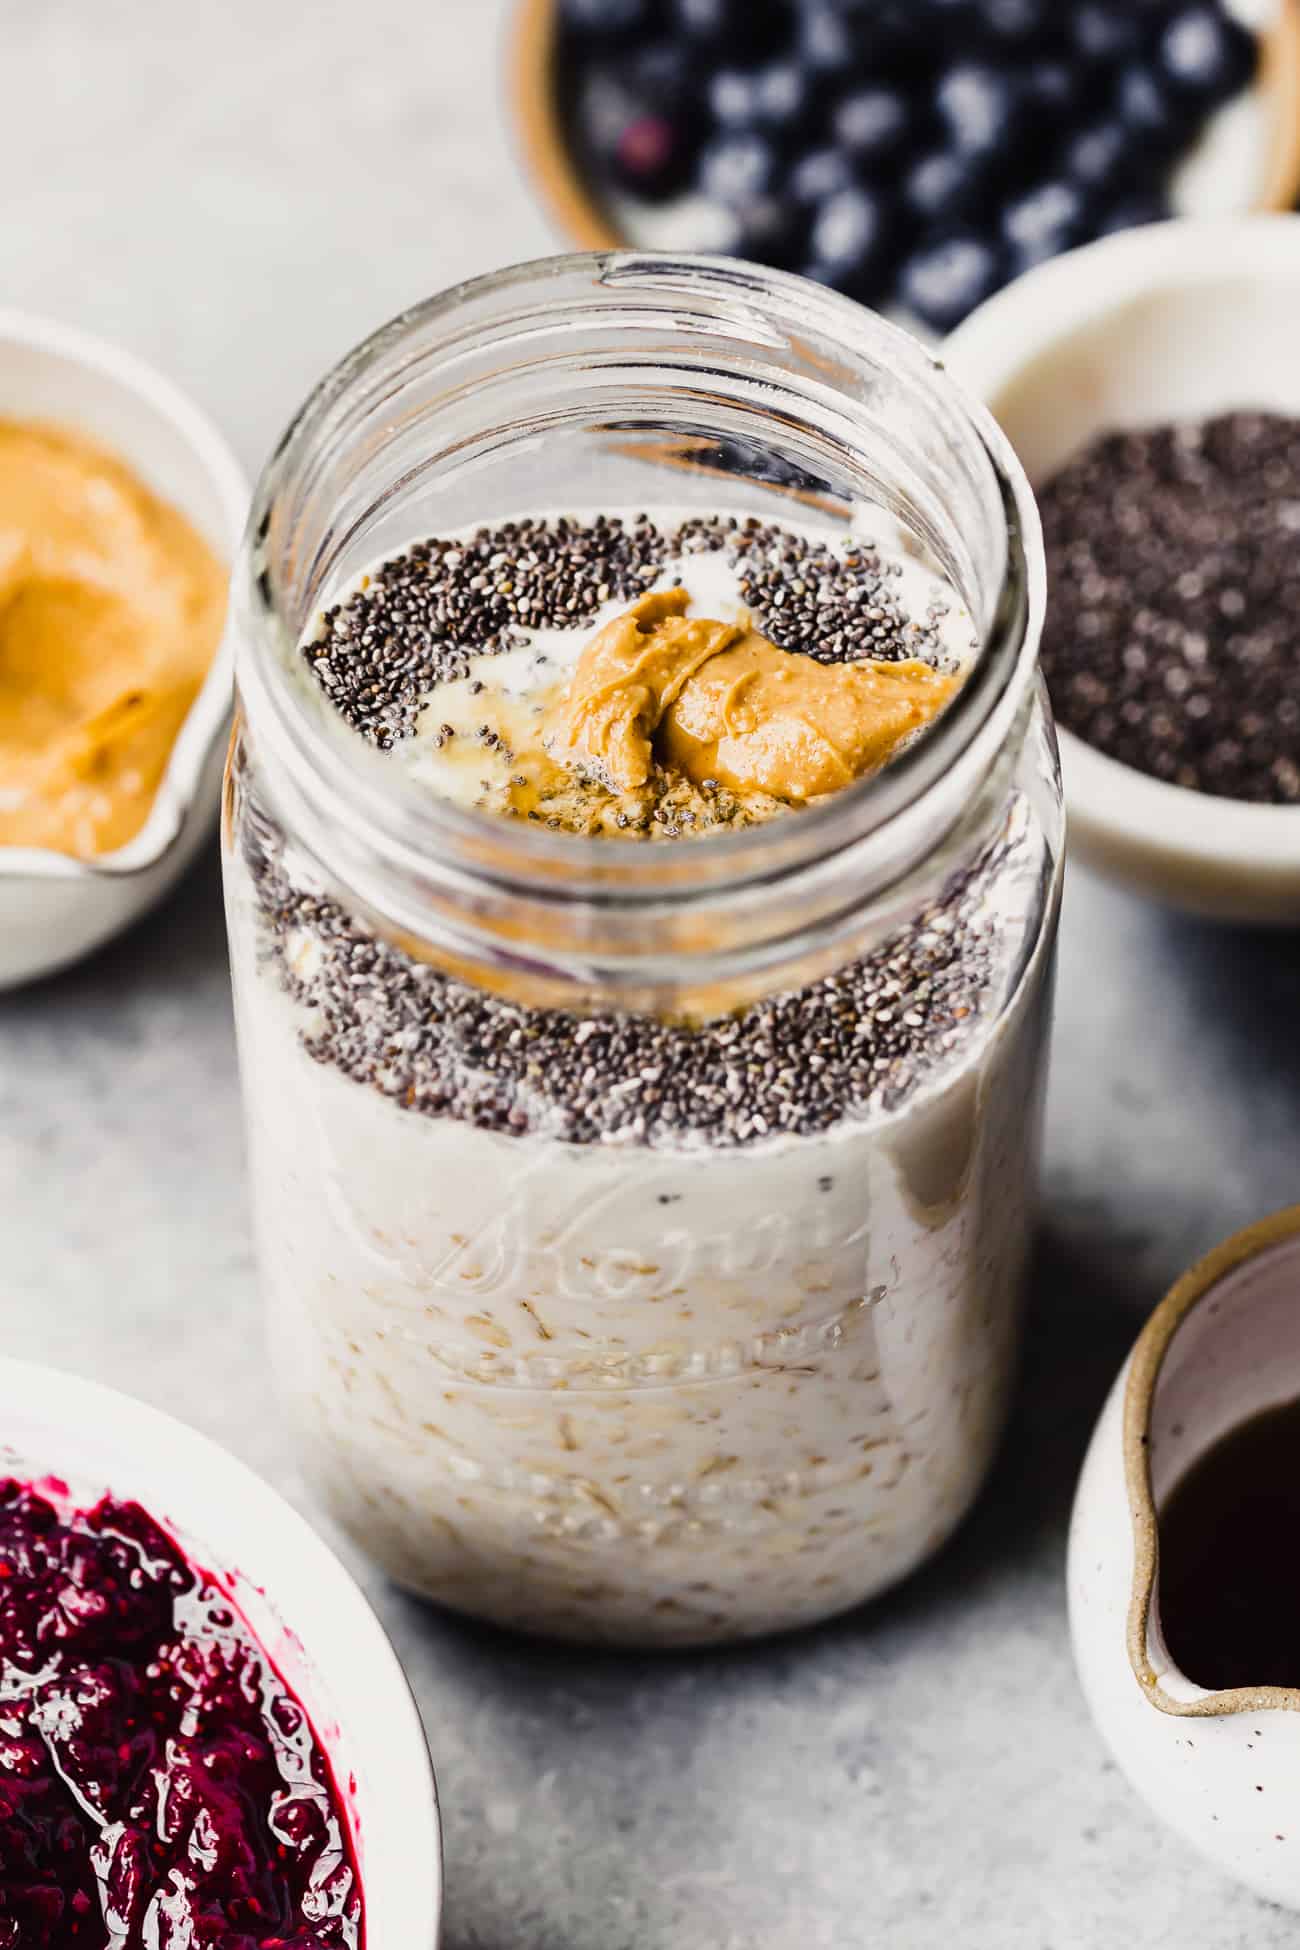 overnight oats being made in a large glass jar with peanut butter